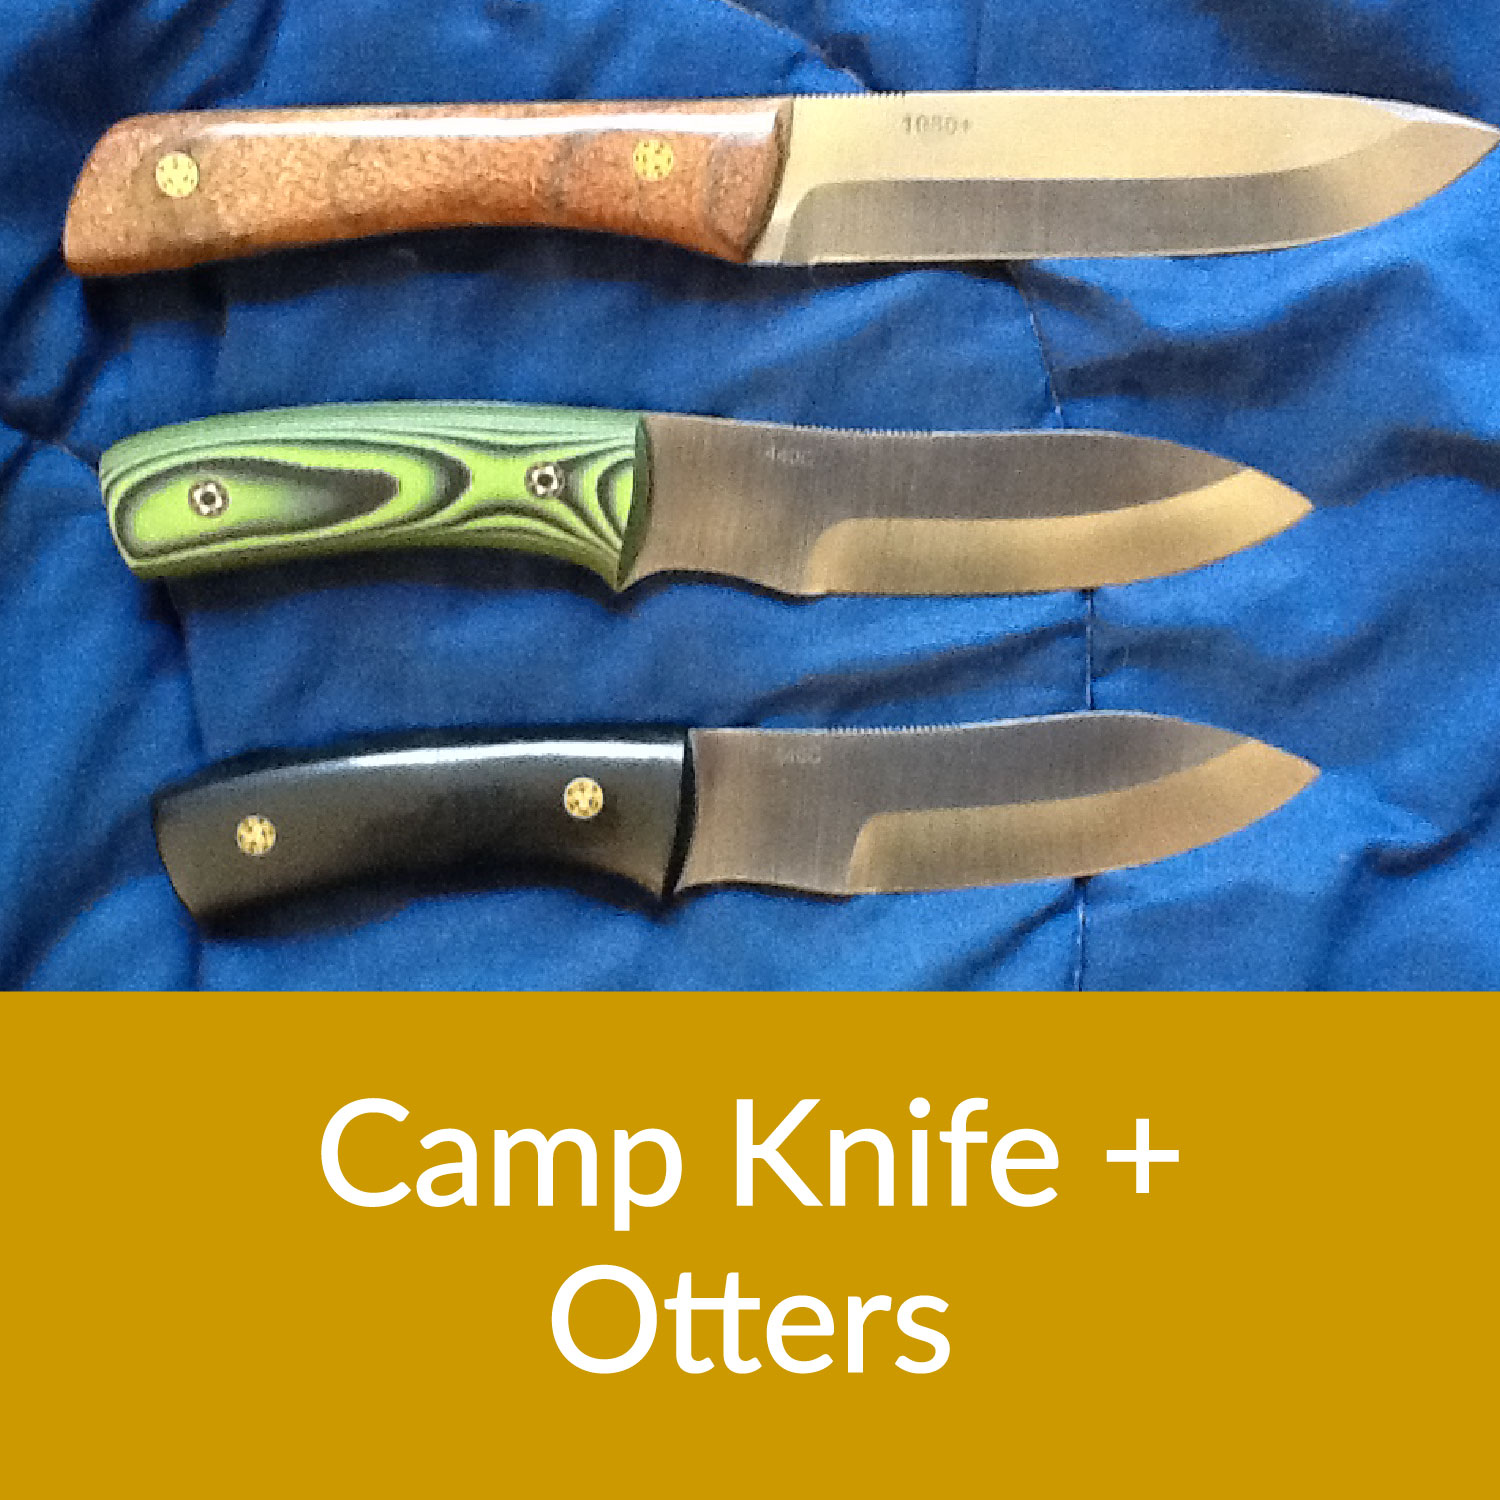 Camp Knives and Otters